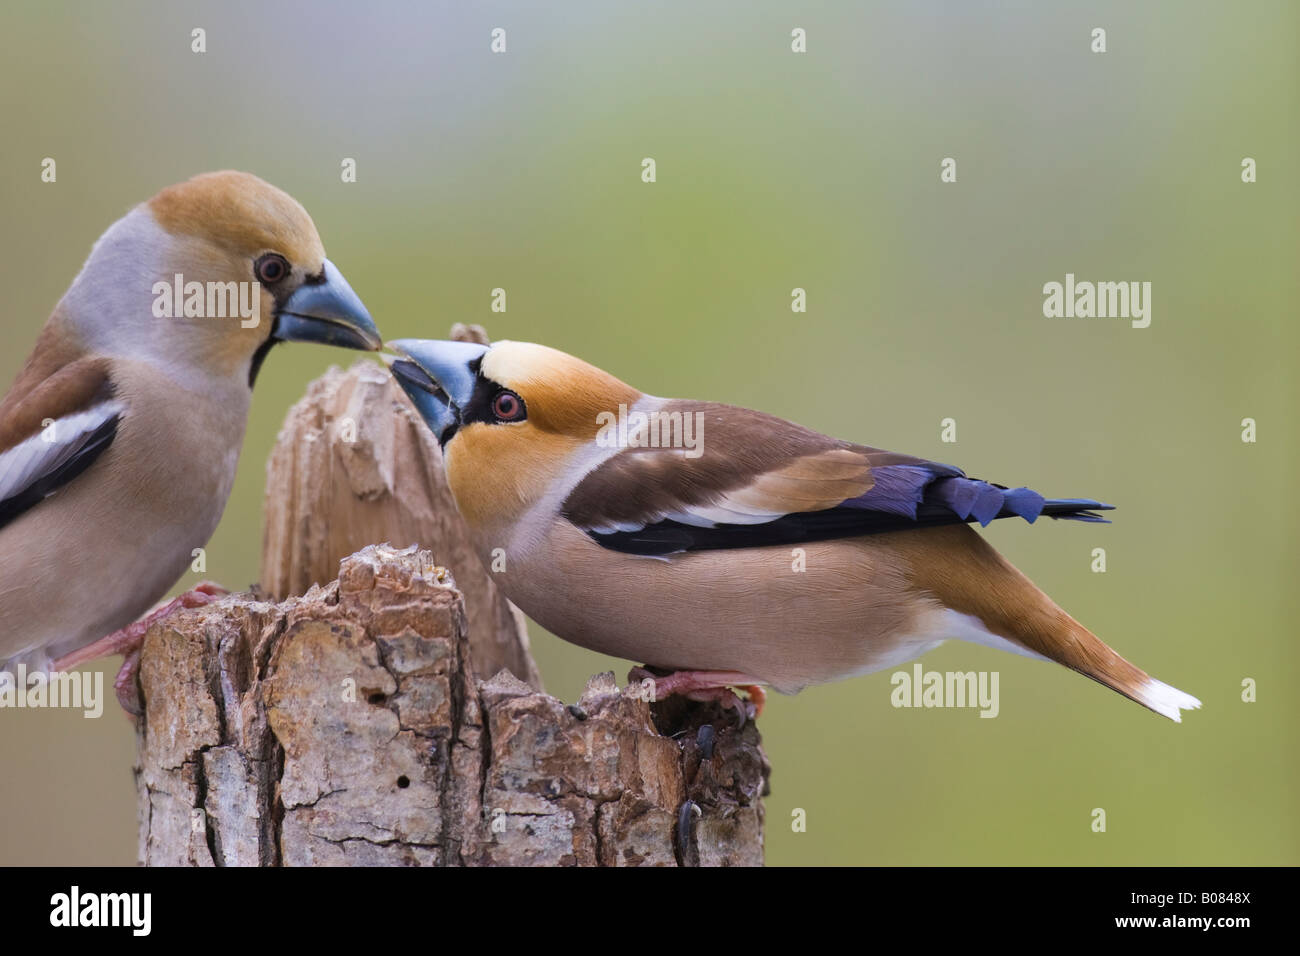 Male Hawfinch (Coccothraustes coccothraustes) offering food to female in courtship ritual Stock Photo